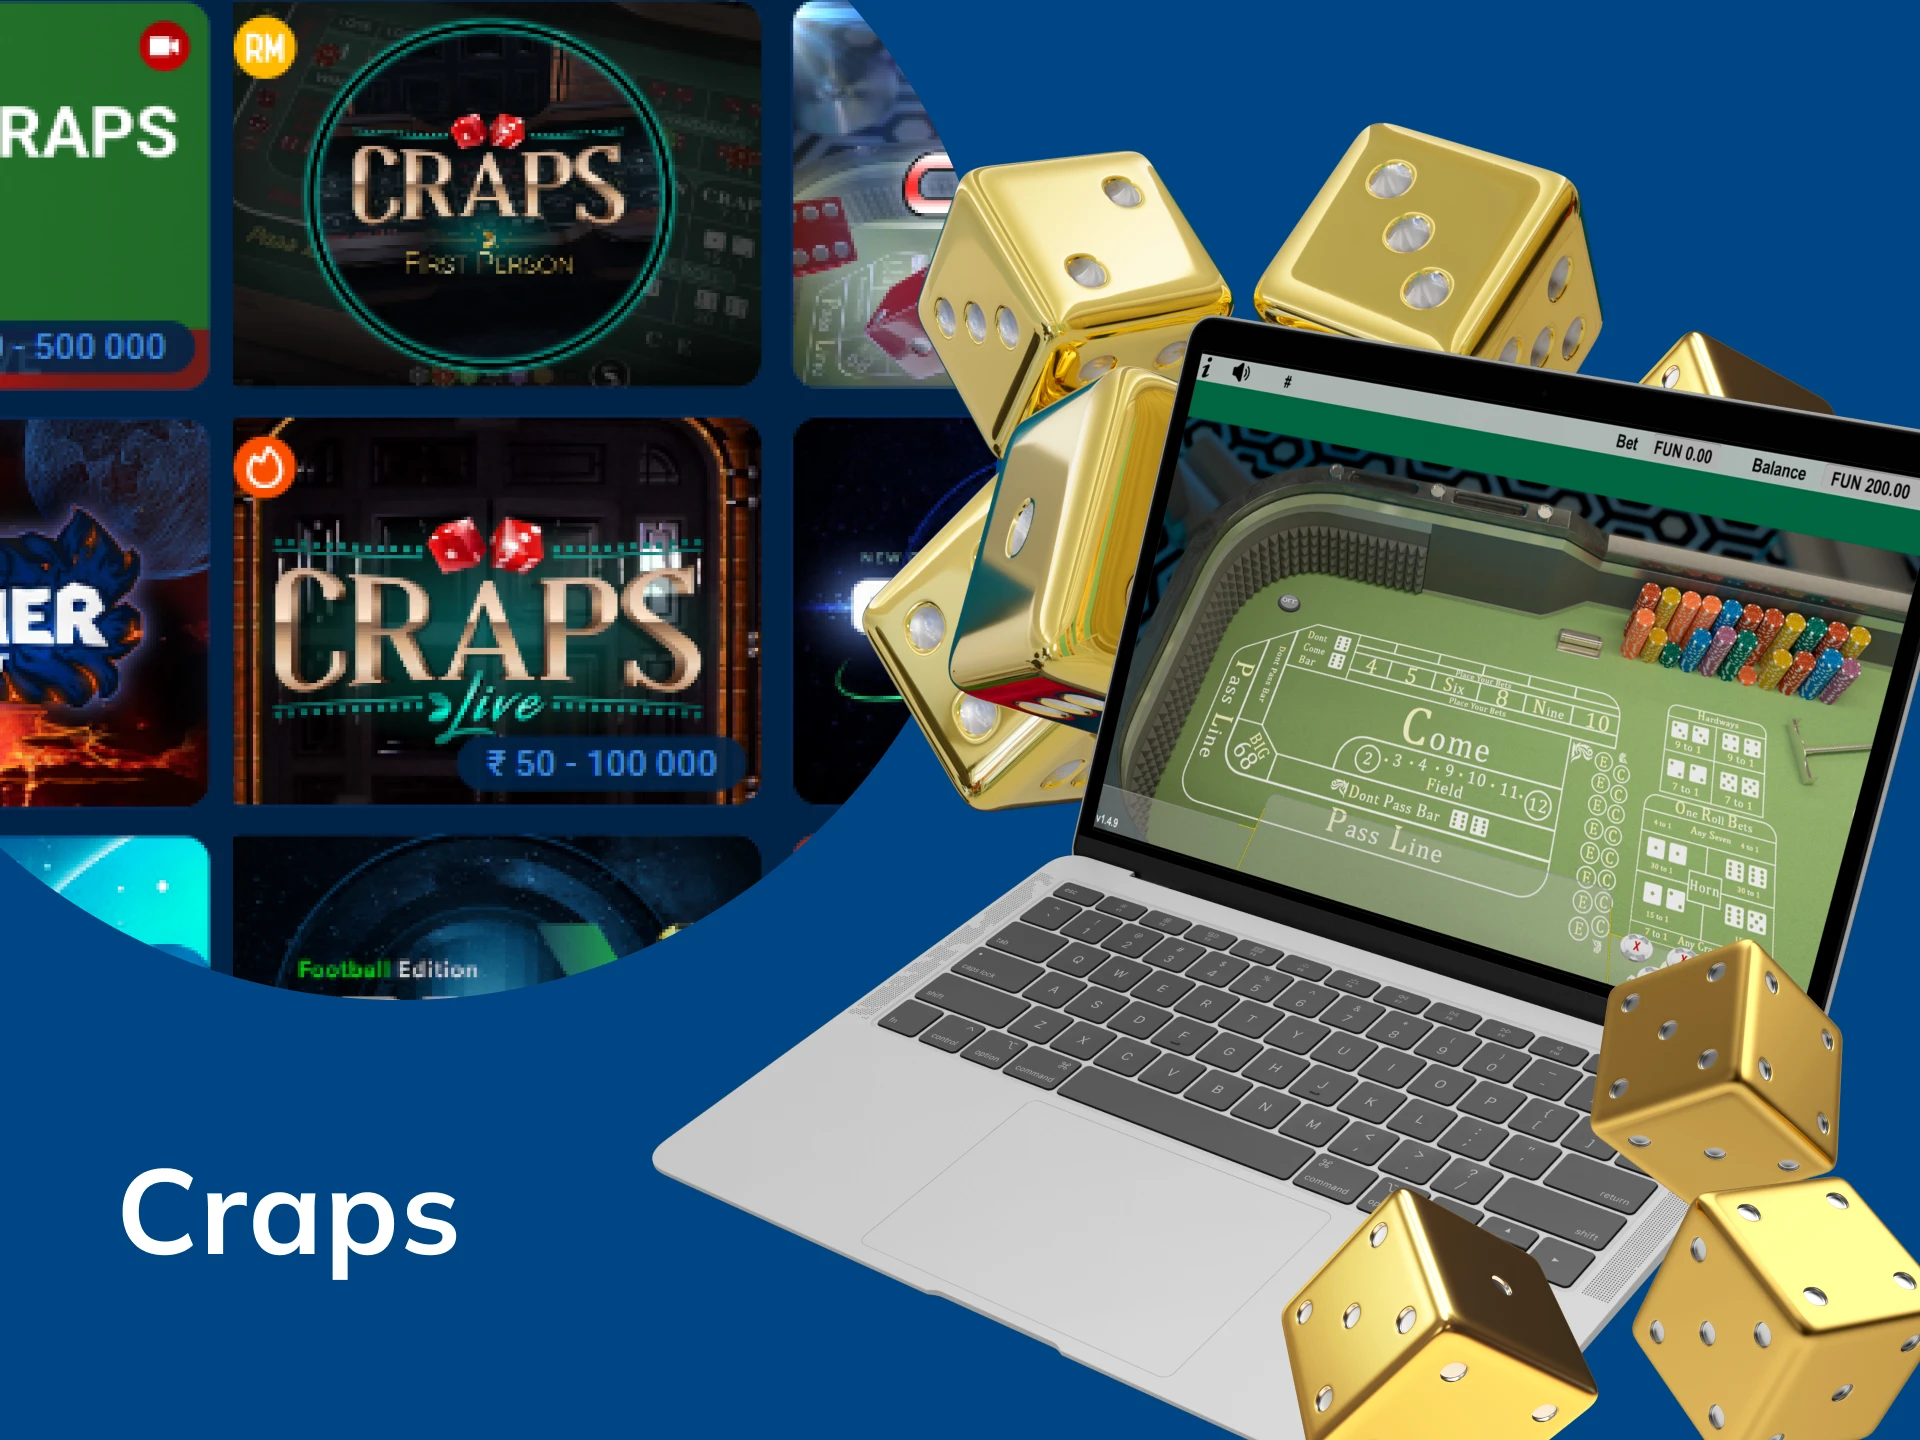 Try your hand at playing craps.